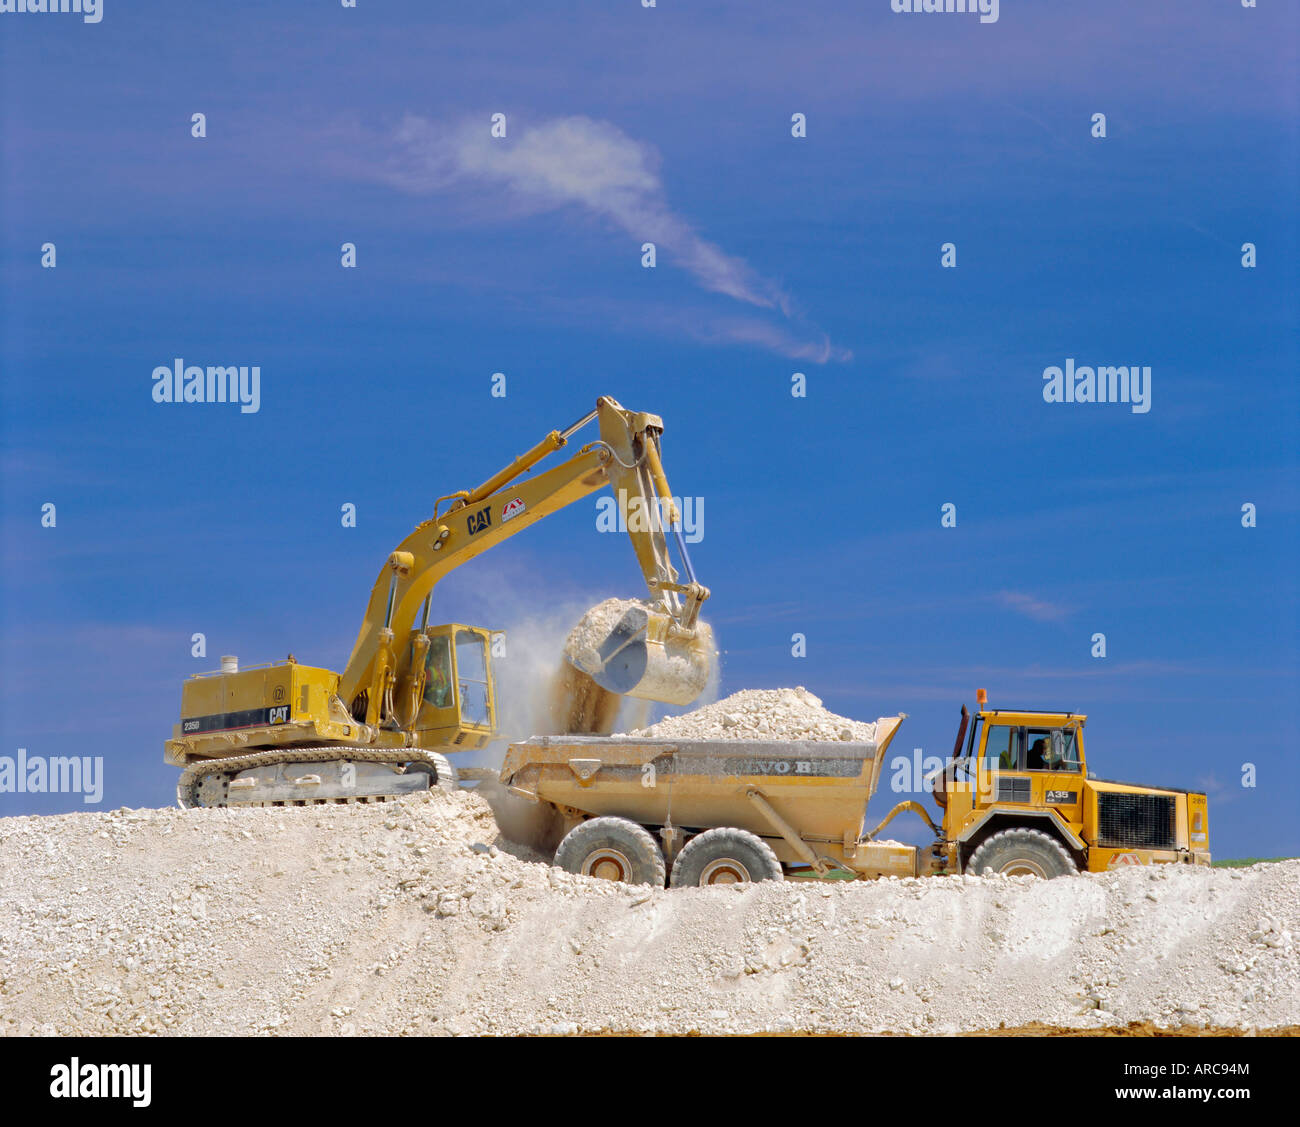 Earth removal, JCBs/Diggers, Construction Industry Stock Photo